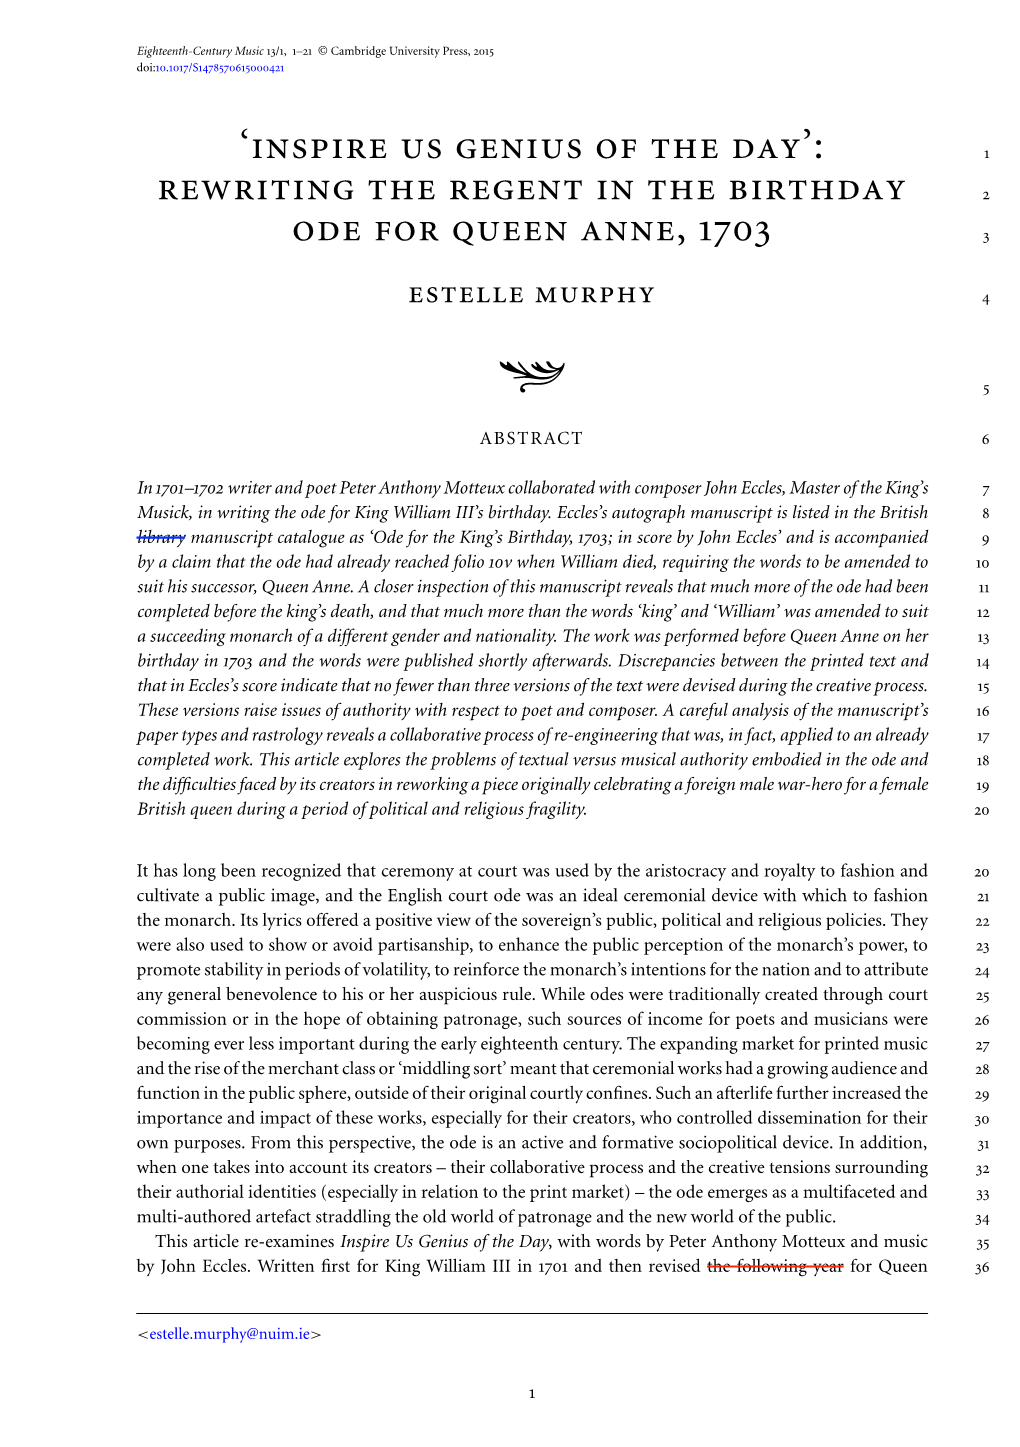 'Inspire Us Genius of the Day': Rewriting the Regent in the Birthday Ode for Queen Anne, 1703